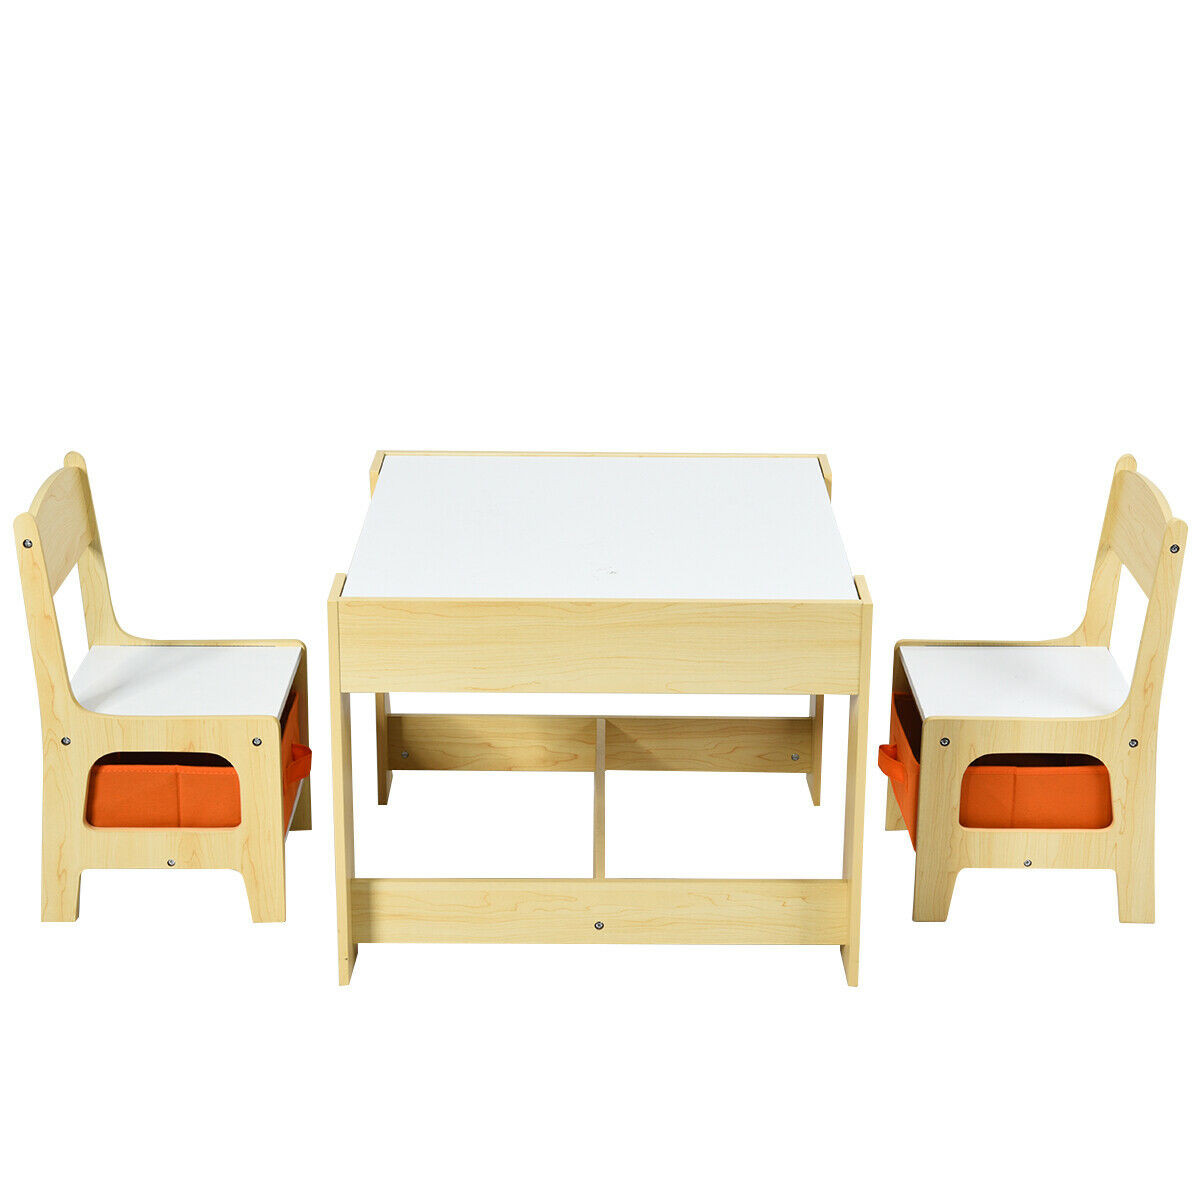 table & chairs kids